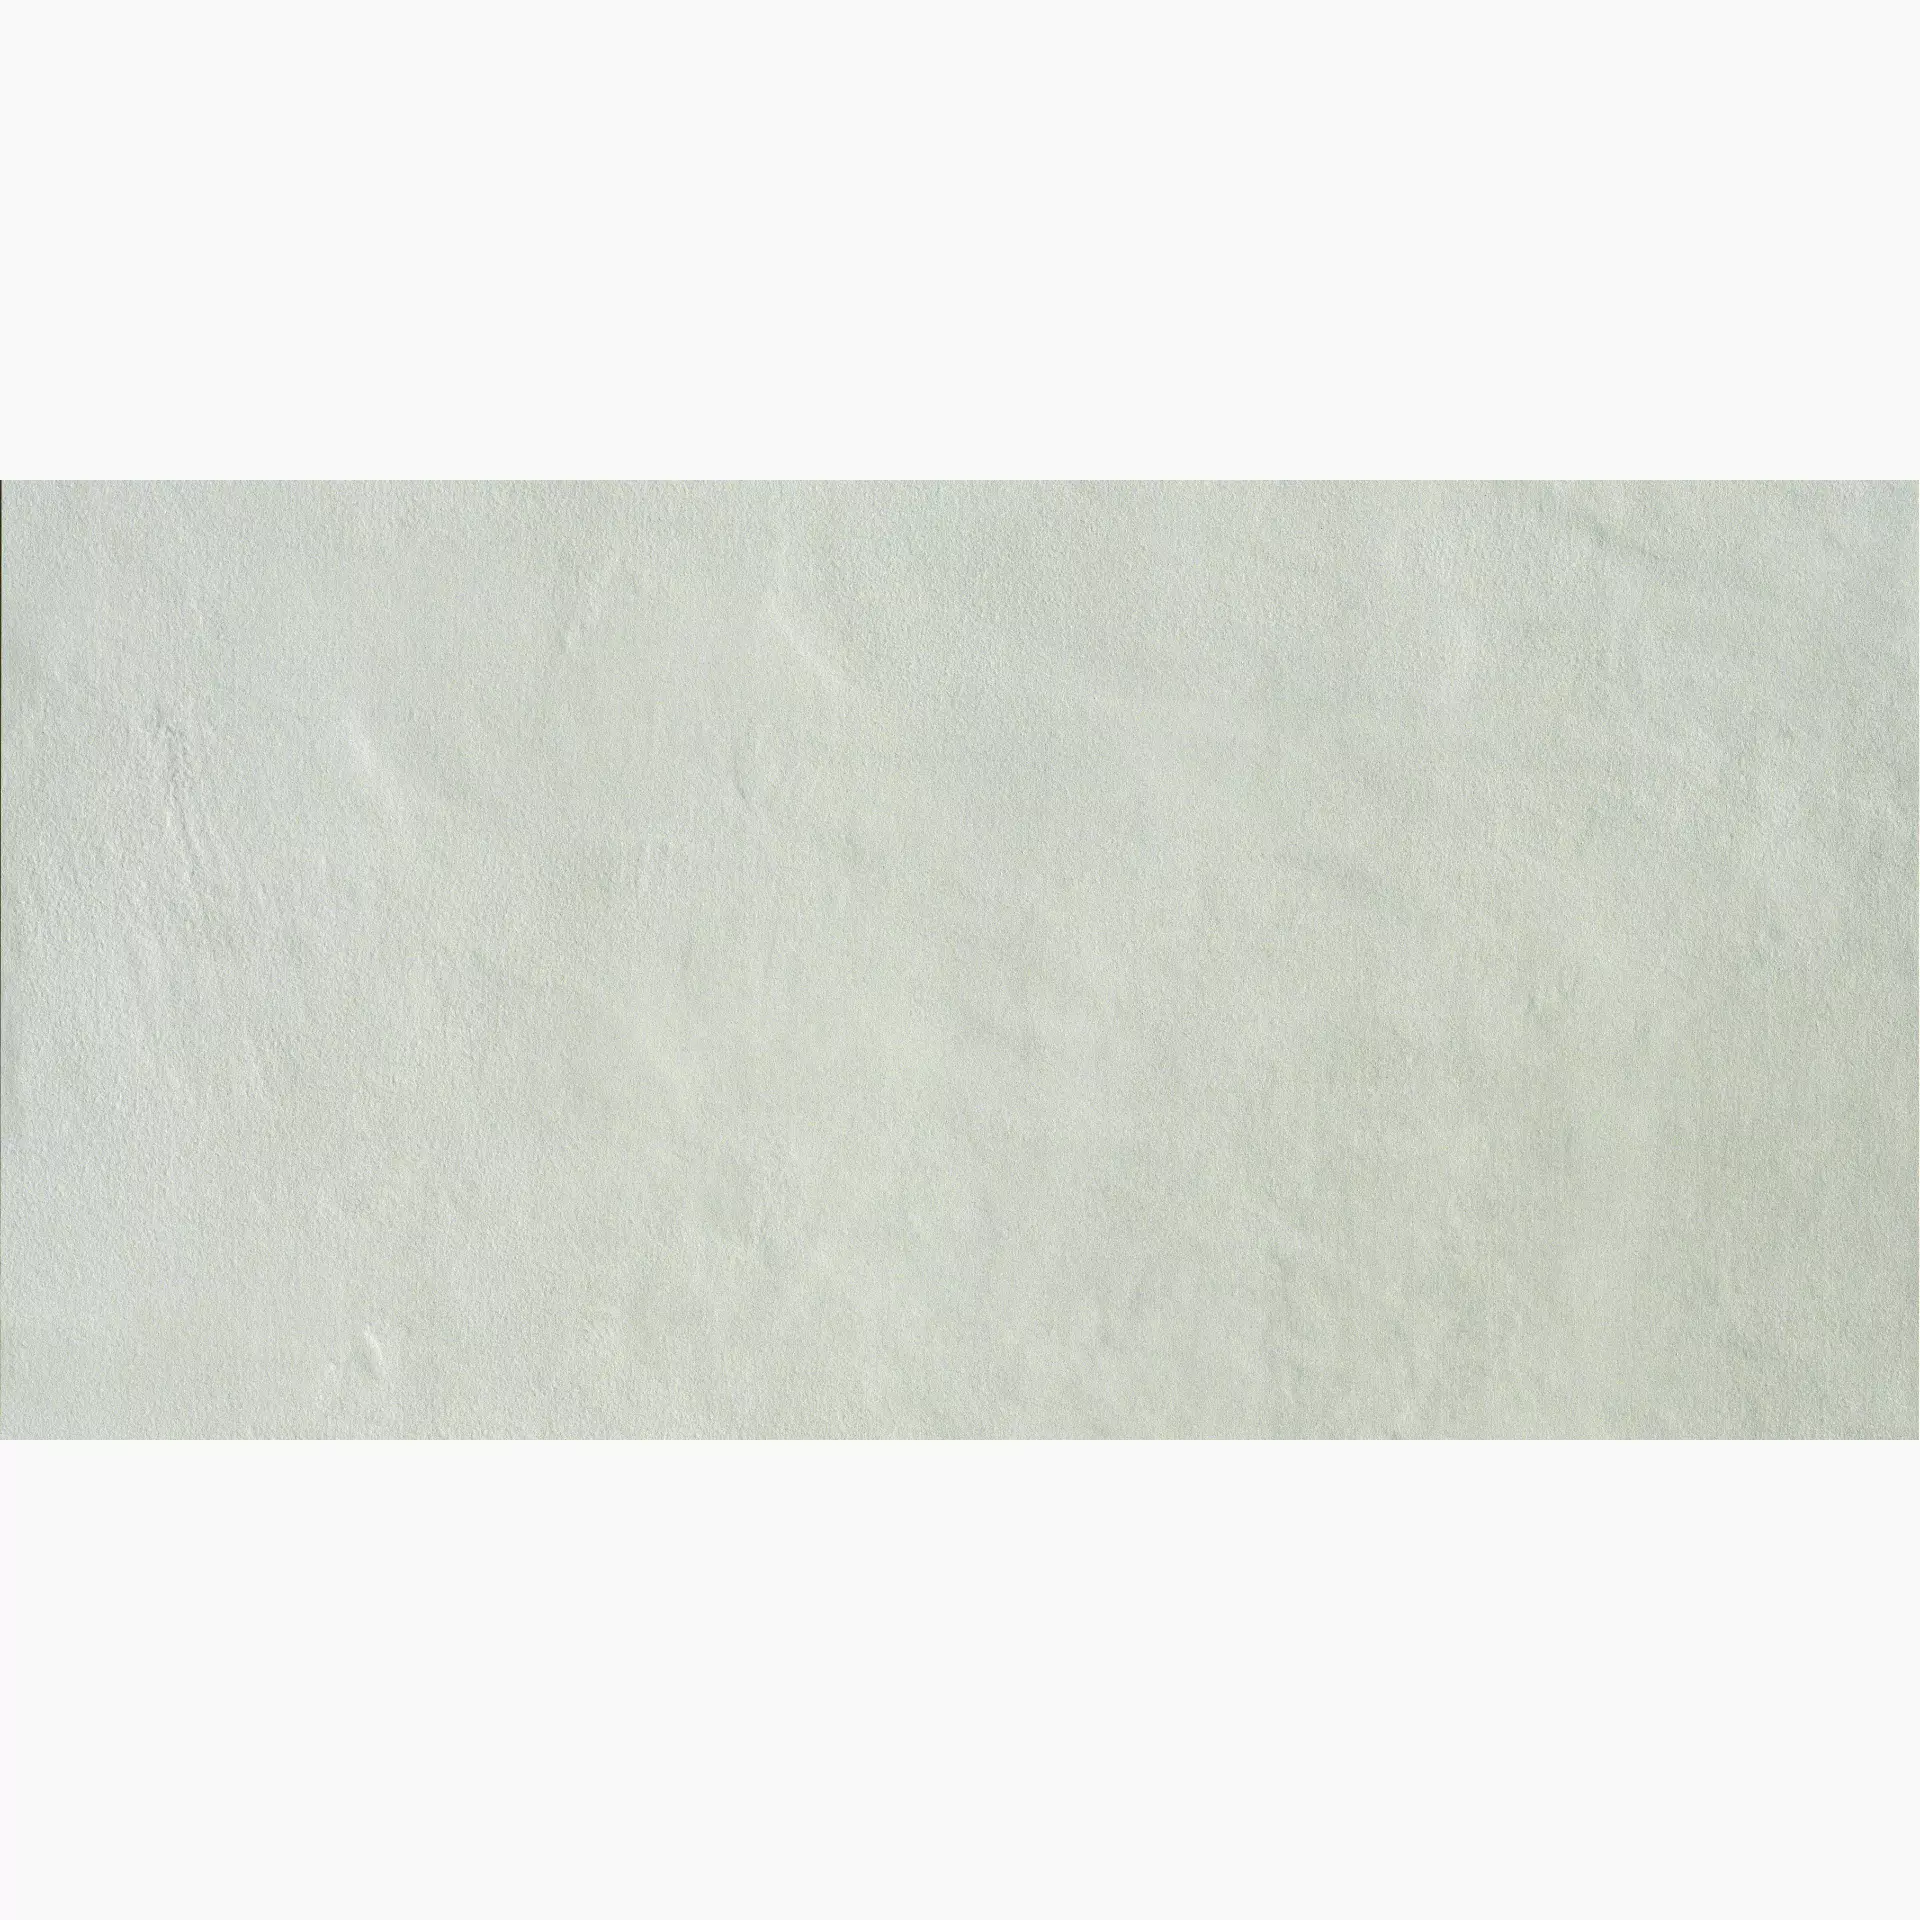 Cercom To Be Gesso Naturale 1061443 60x120cm rectified 9,5mm